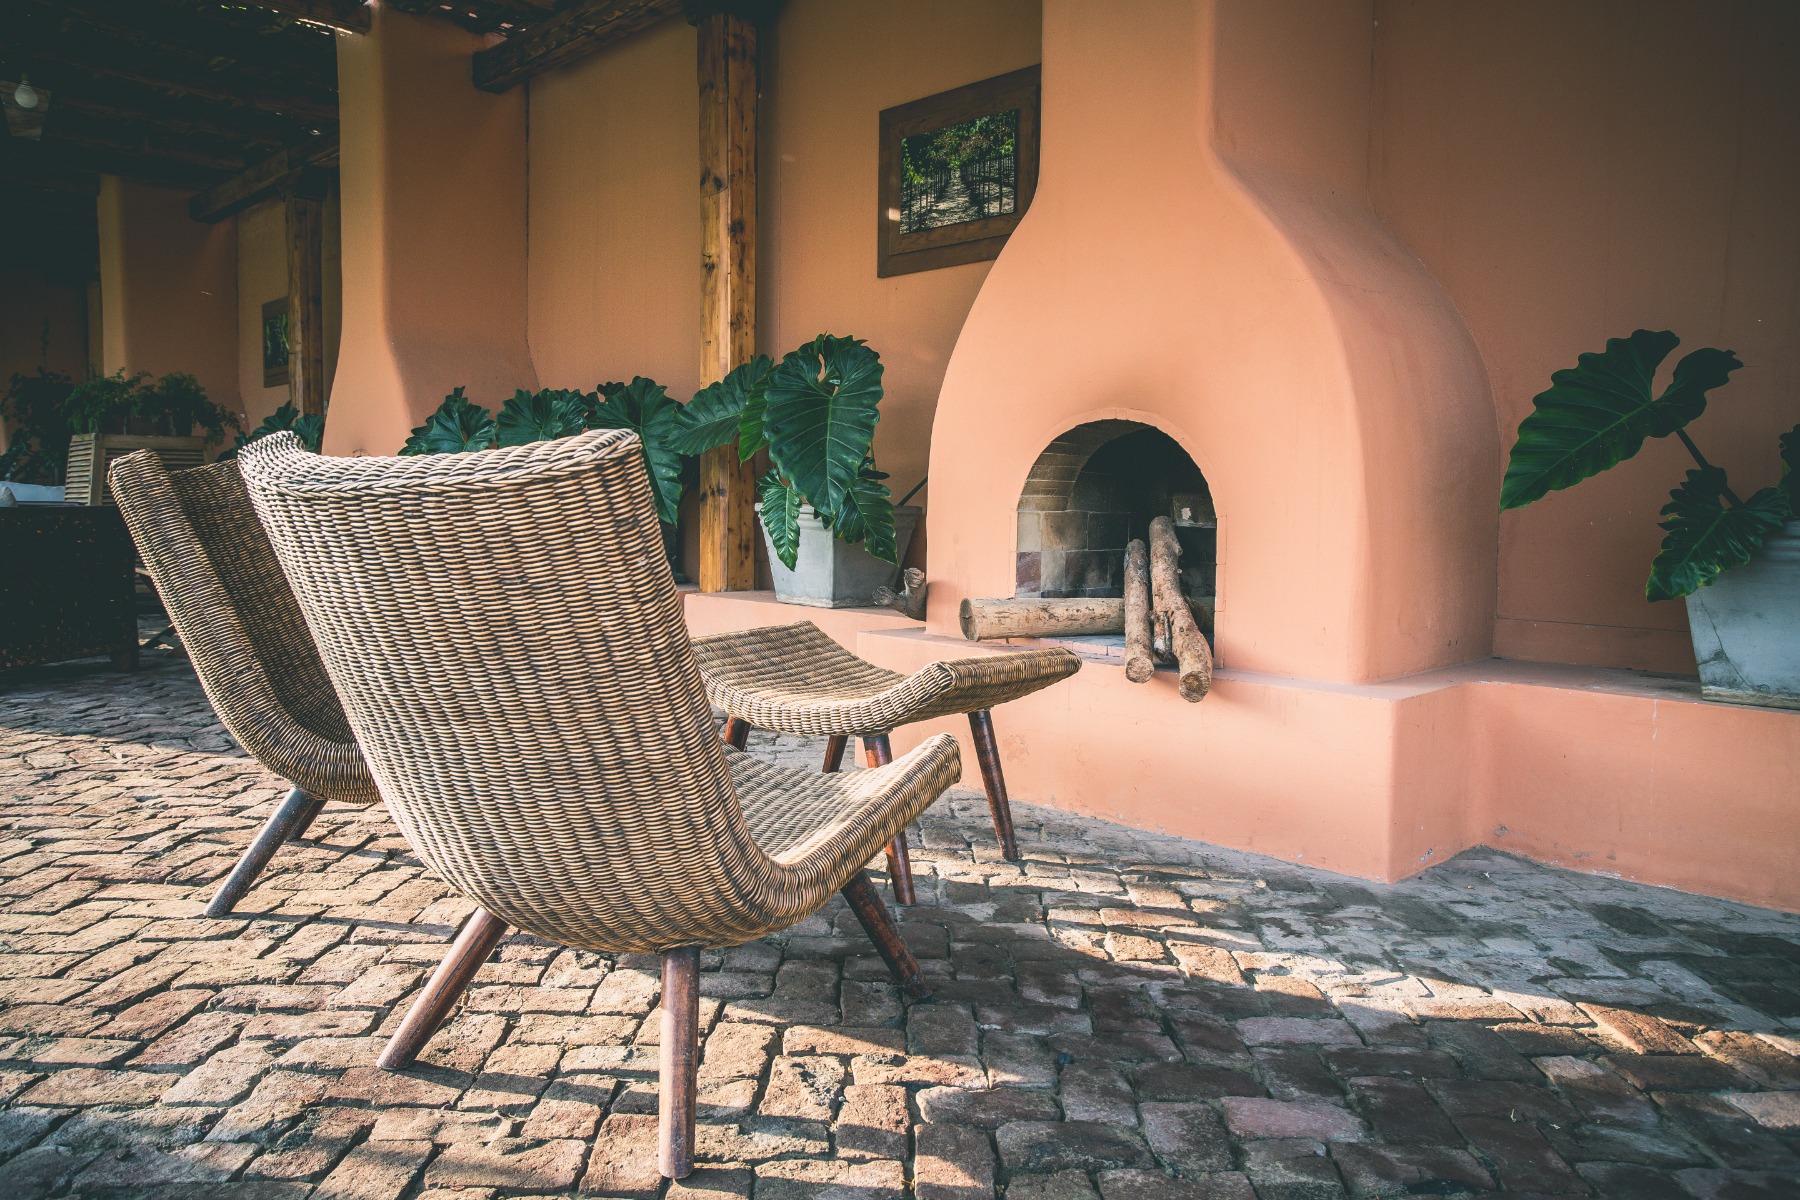 Two wicker chairs in patio right across wood burner fireplace